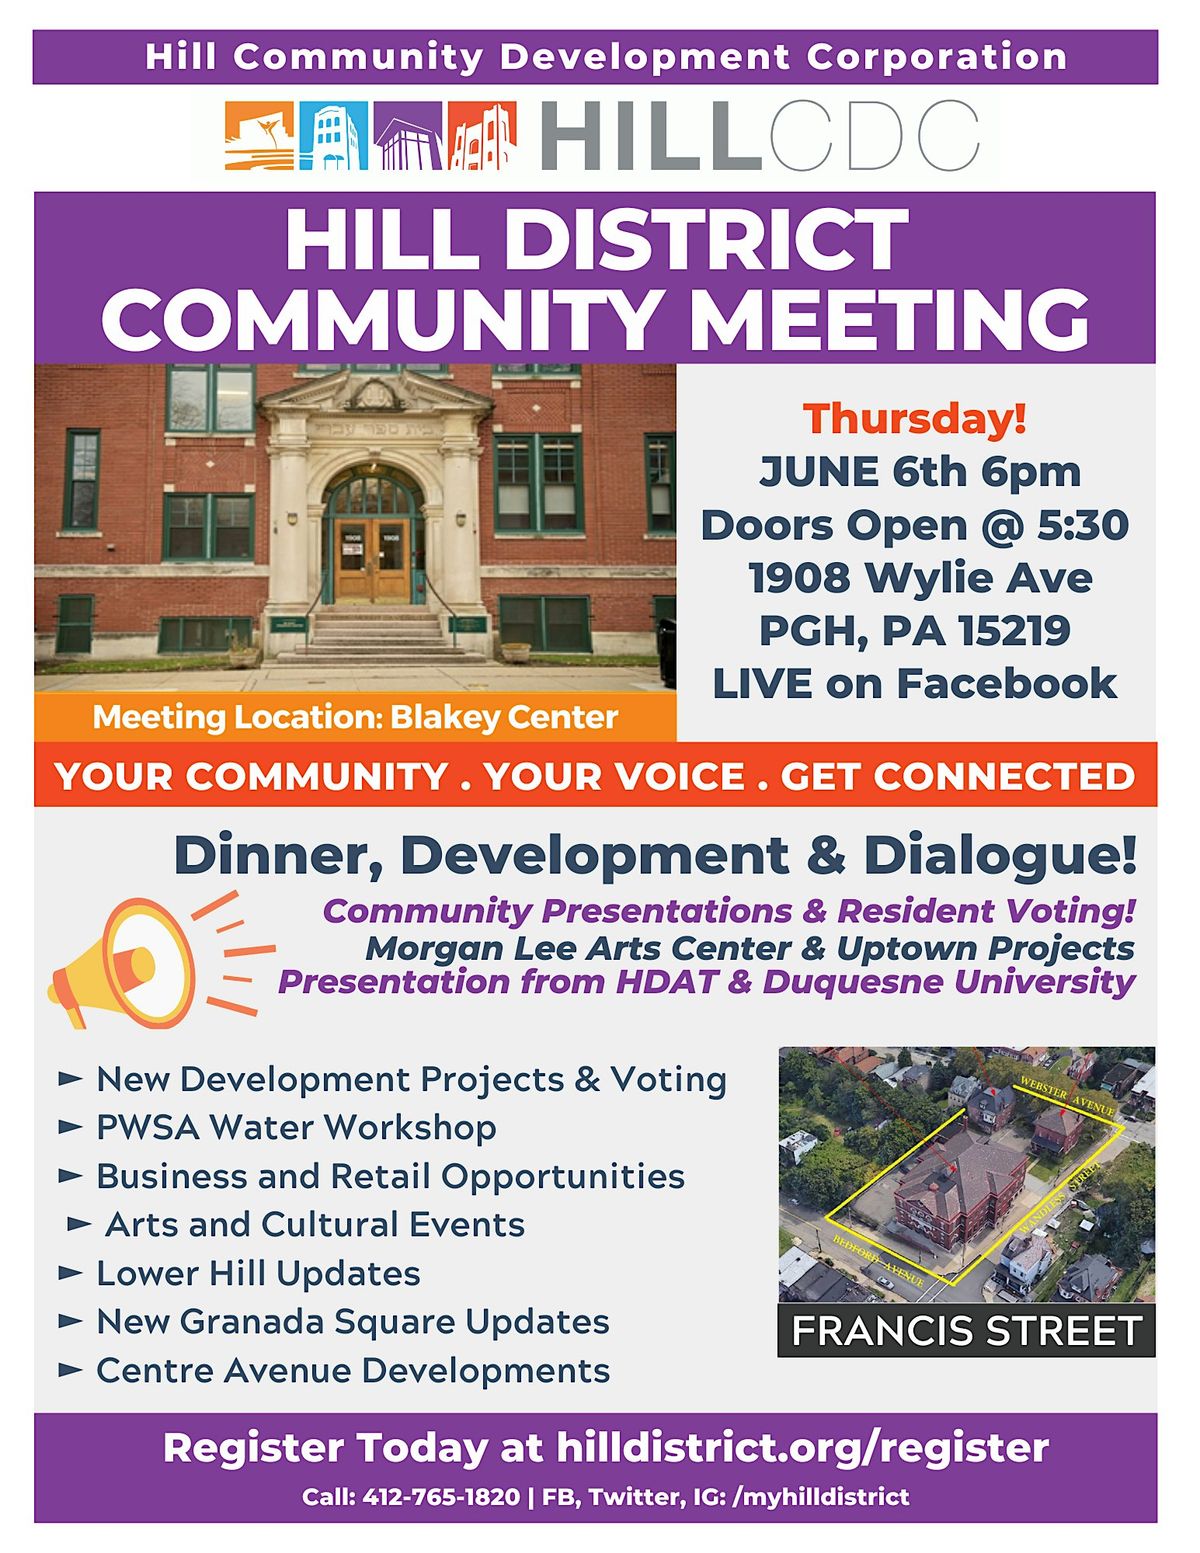 Hill District Community Meeting